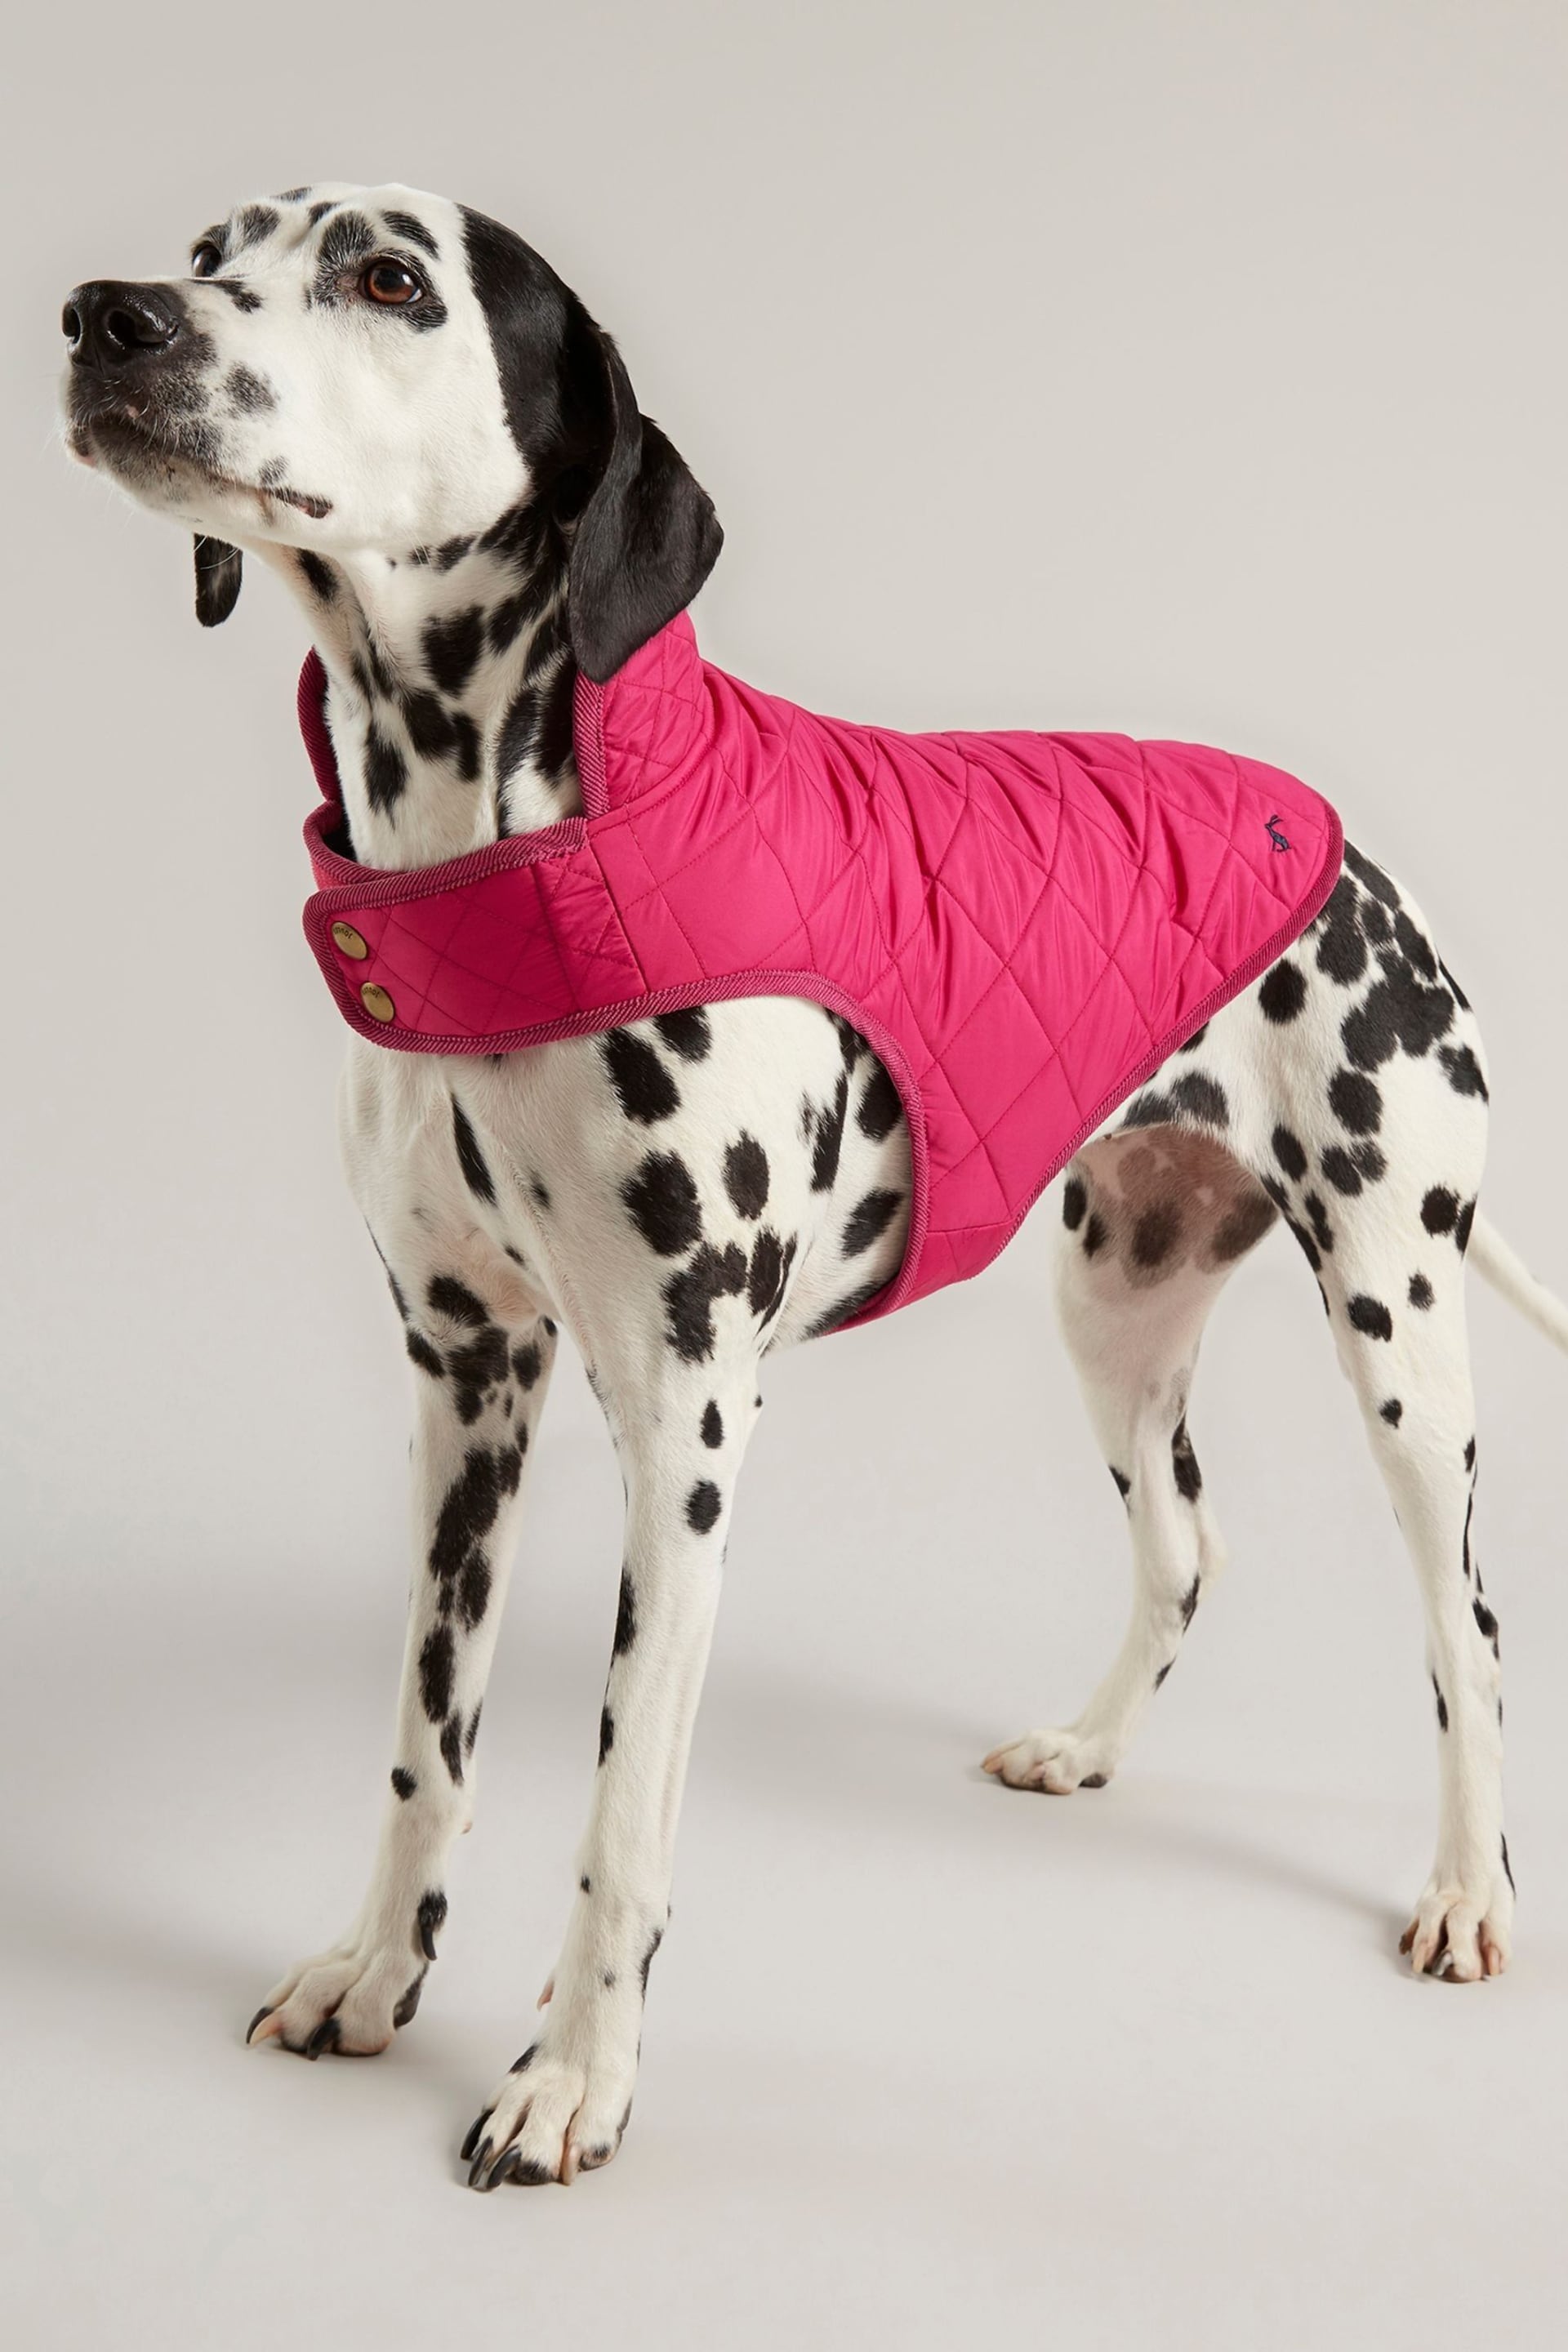 Joules Raspberry Pink Quilted Rain Dog Coat - Image 1 of 4